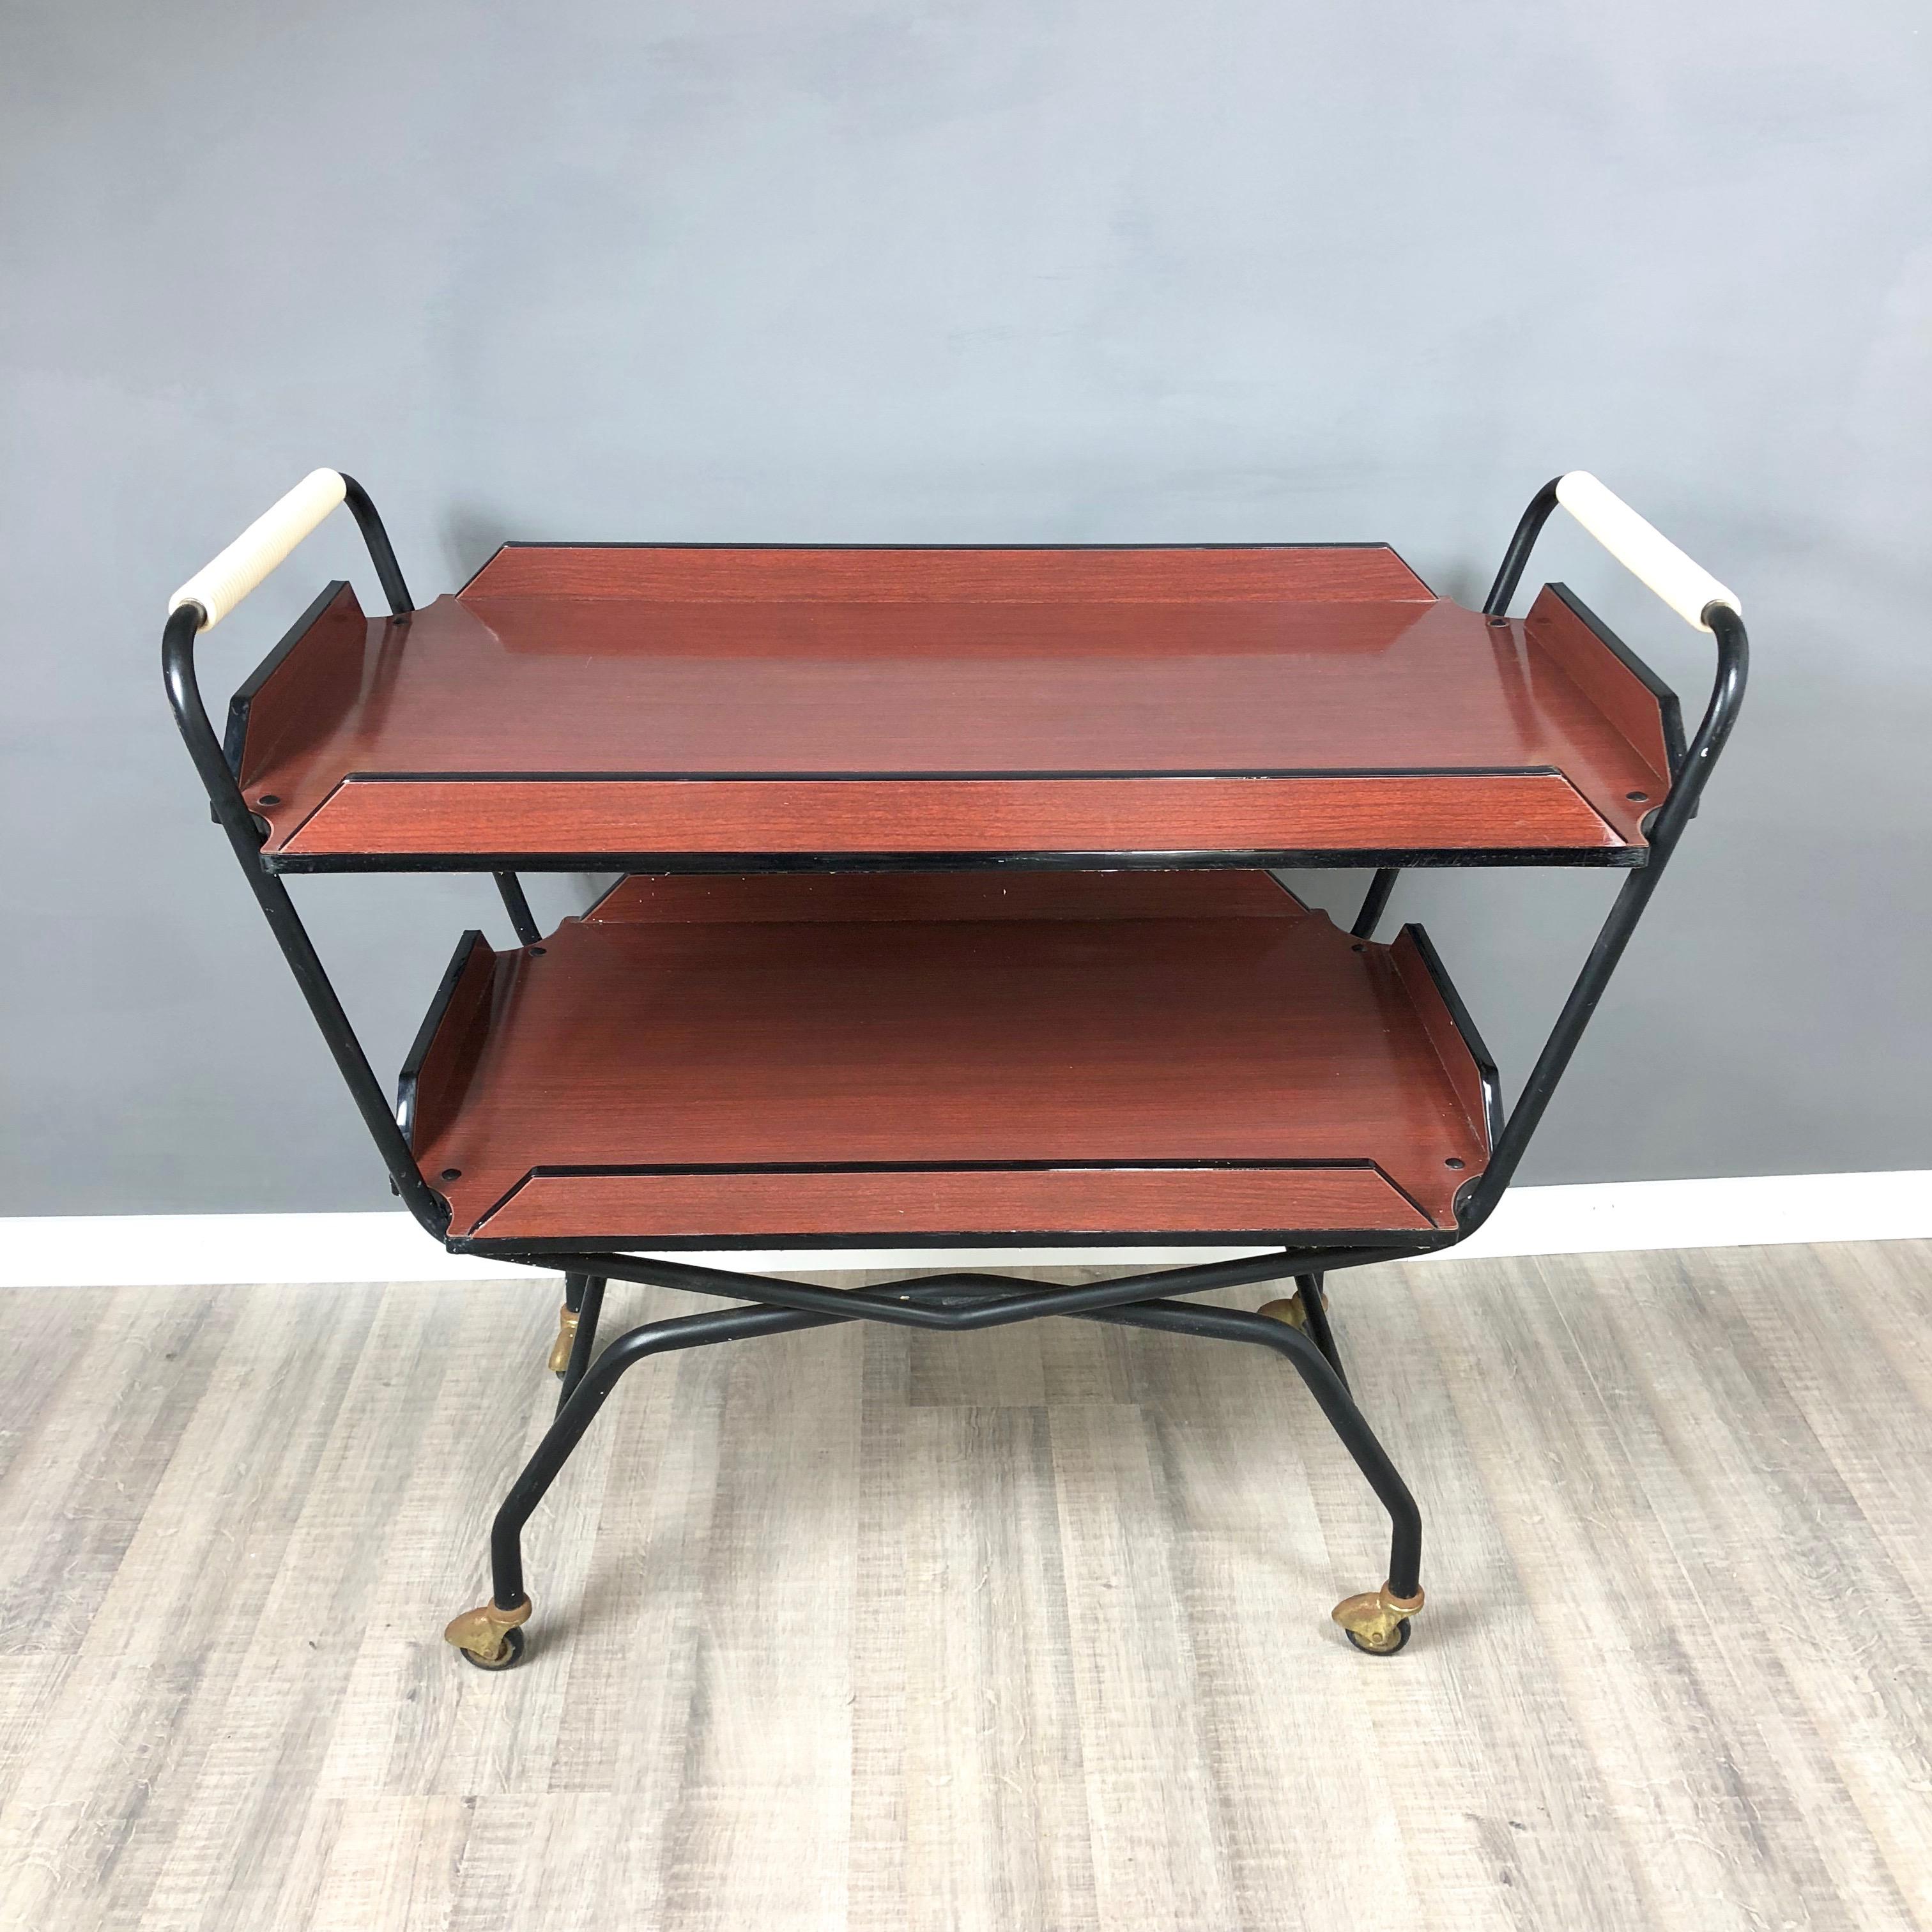 Black and red brown serving bar cart or trolley in formica and metal with double tray.